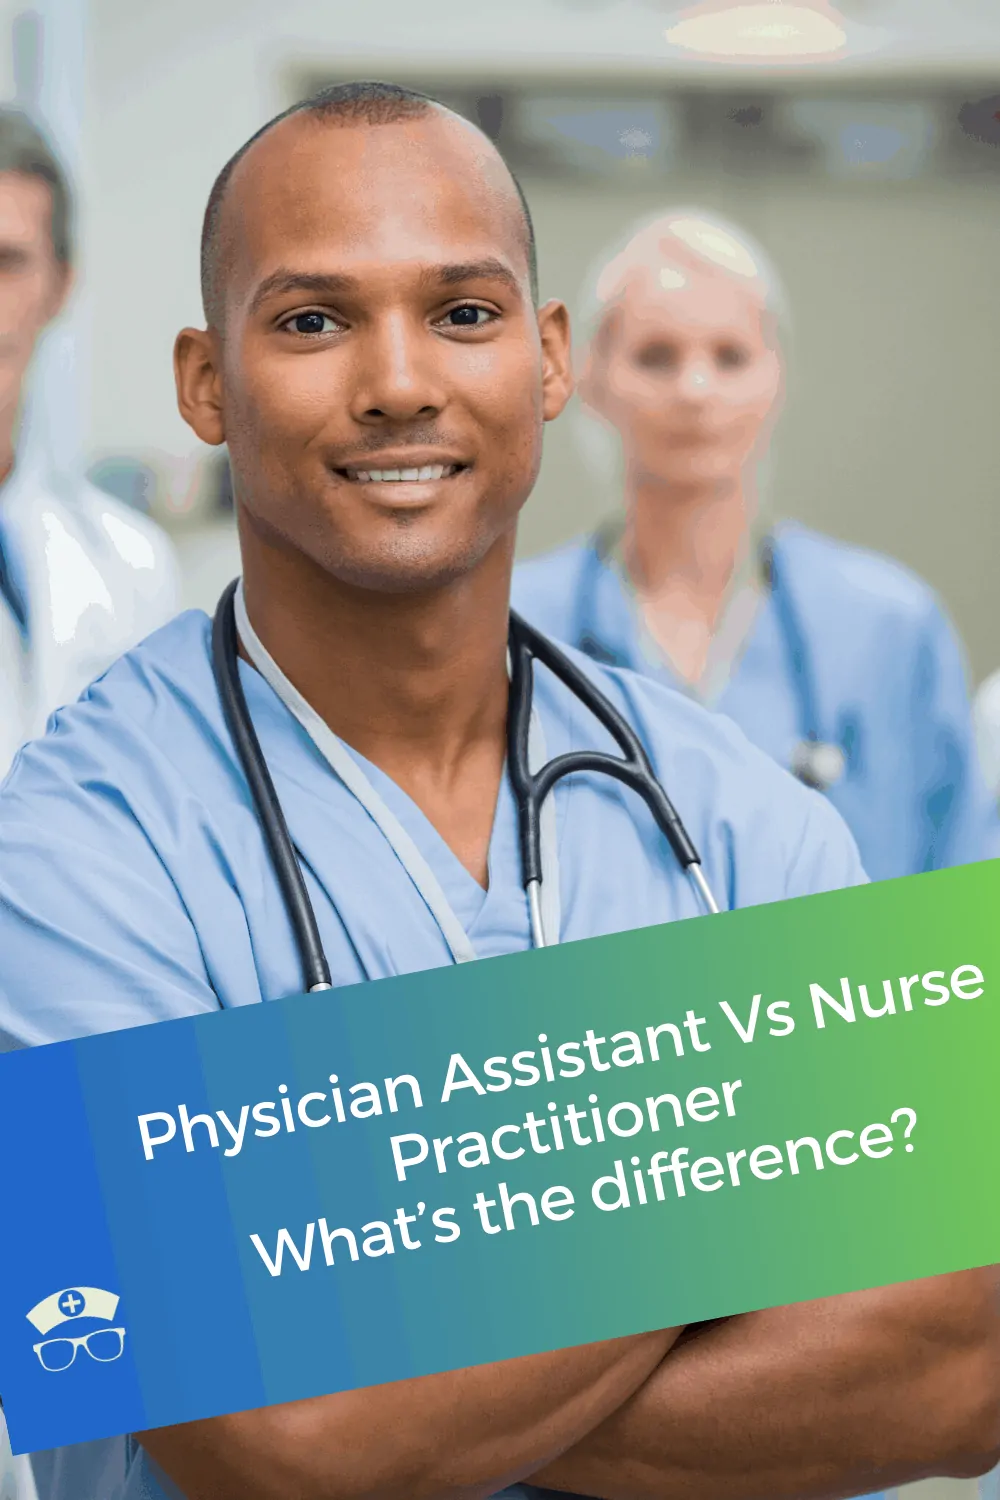 Physician Assistant Vs Nurse Practitioner - What’s the difference? Are you debating between becoming a physician assistant vs nurse practitioner? Let's look at the differences so you can pick the right one for you. #thenerdynurse #nurse #nurses #nursespeciality #nursepractitioner #physicianassistant #pa #np